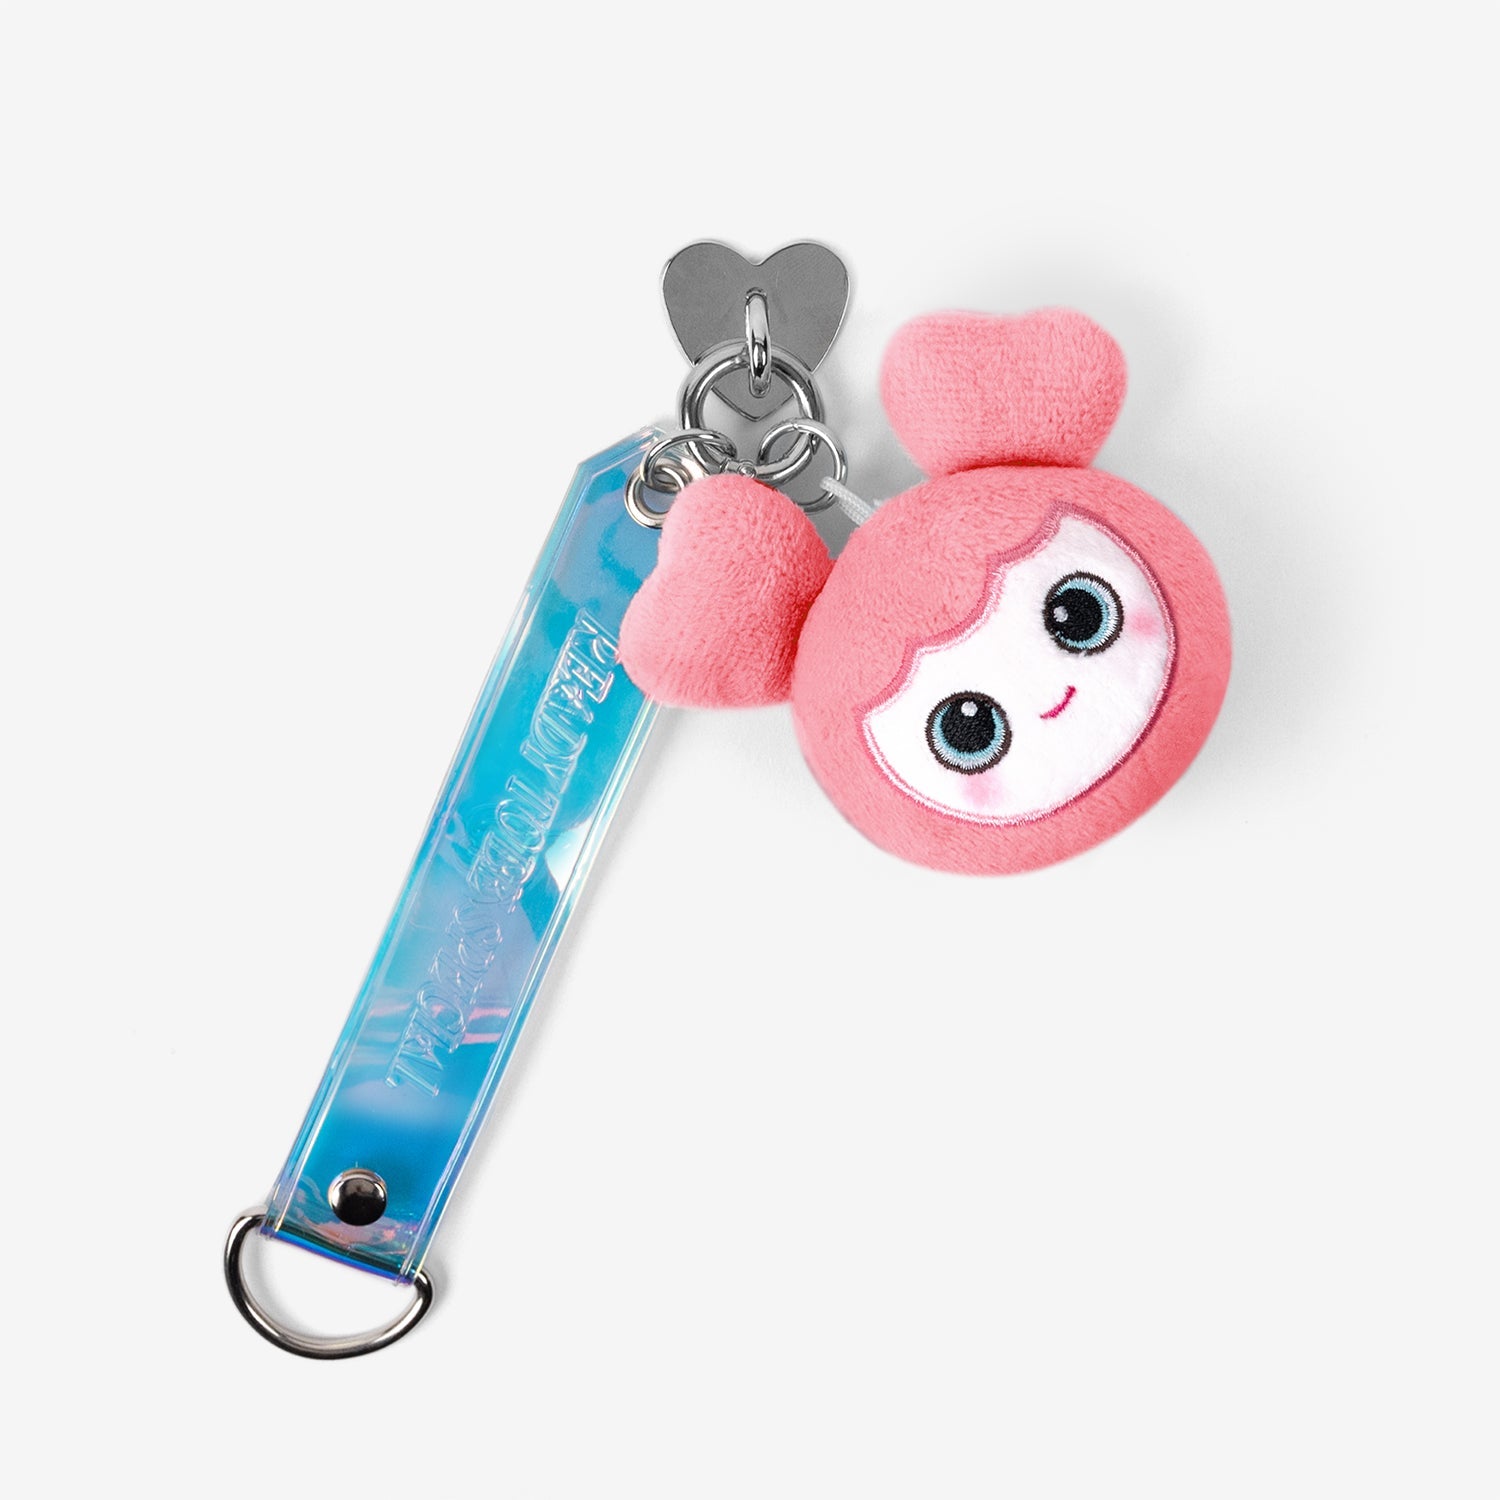 BABY LOVELYS SMARTPHONE CHARM STRAP - BABY MOVELY / TWICE『READY TO BE SPECIAL』